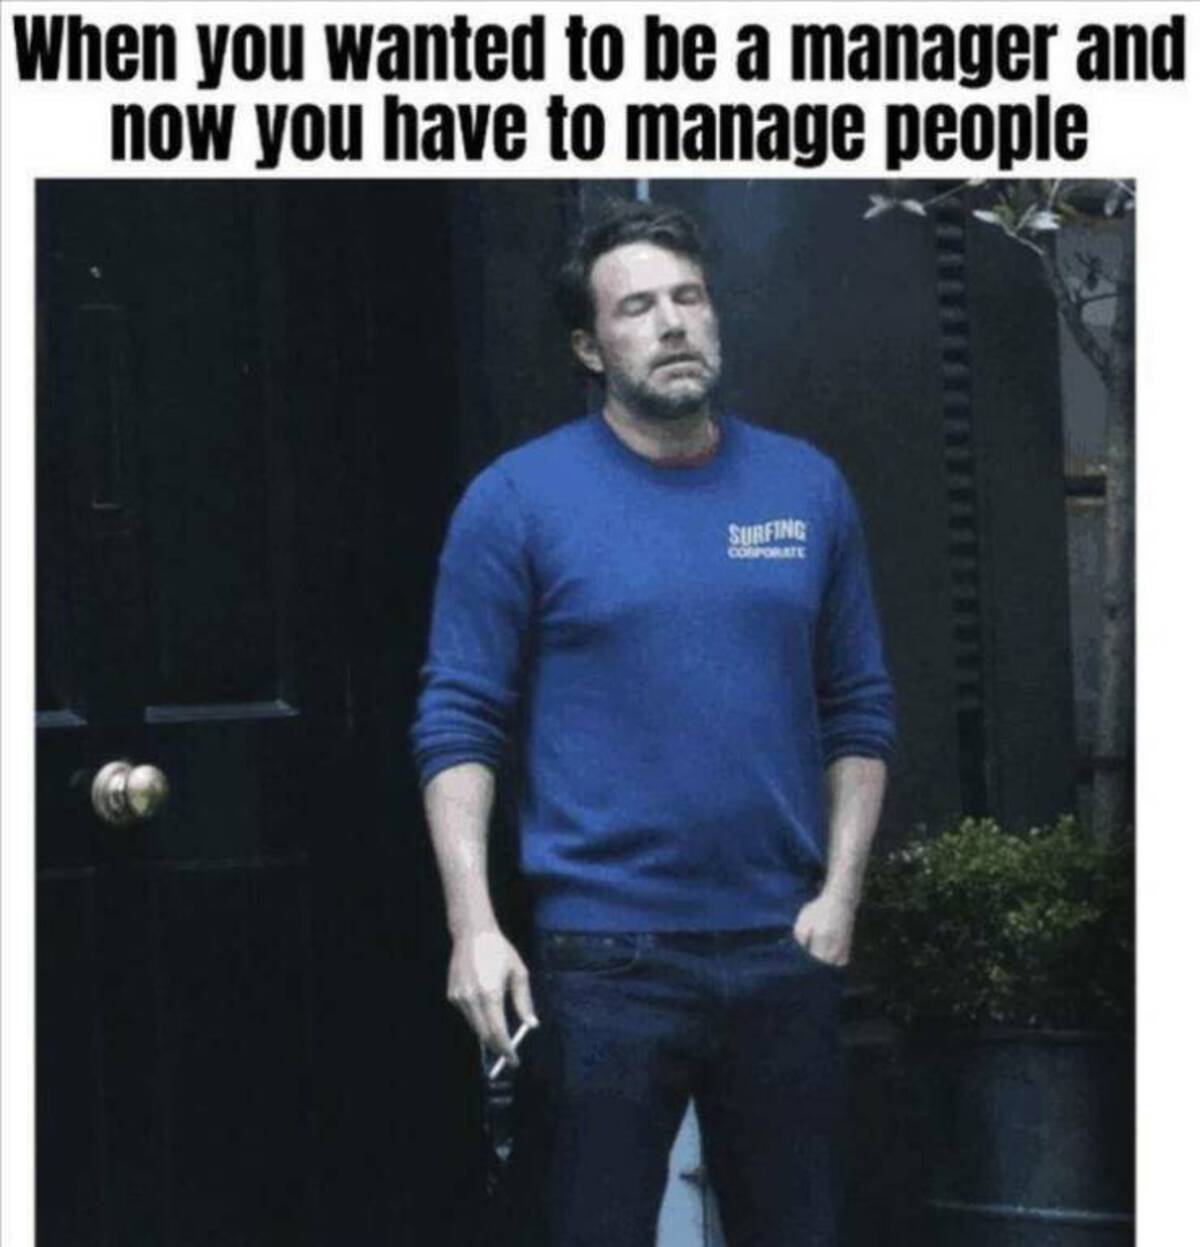 t shirt - When you wanted to be a manager and now you have to manage people Surfing Corporate